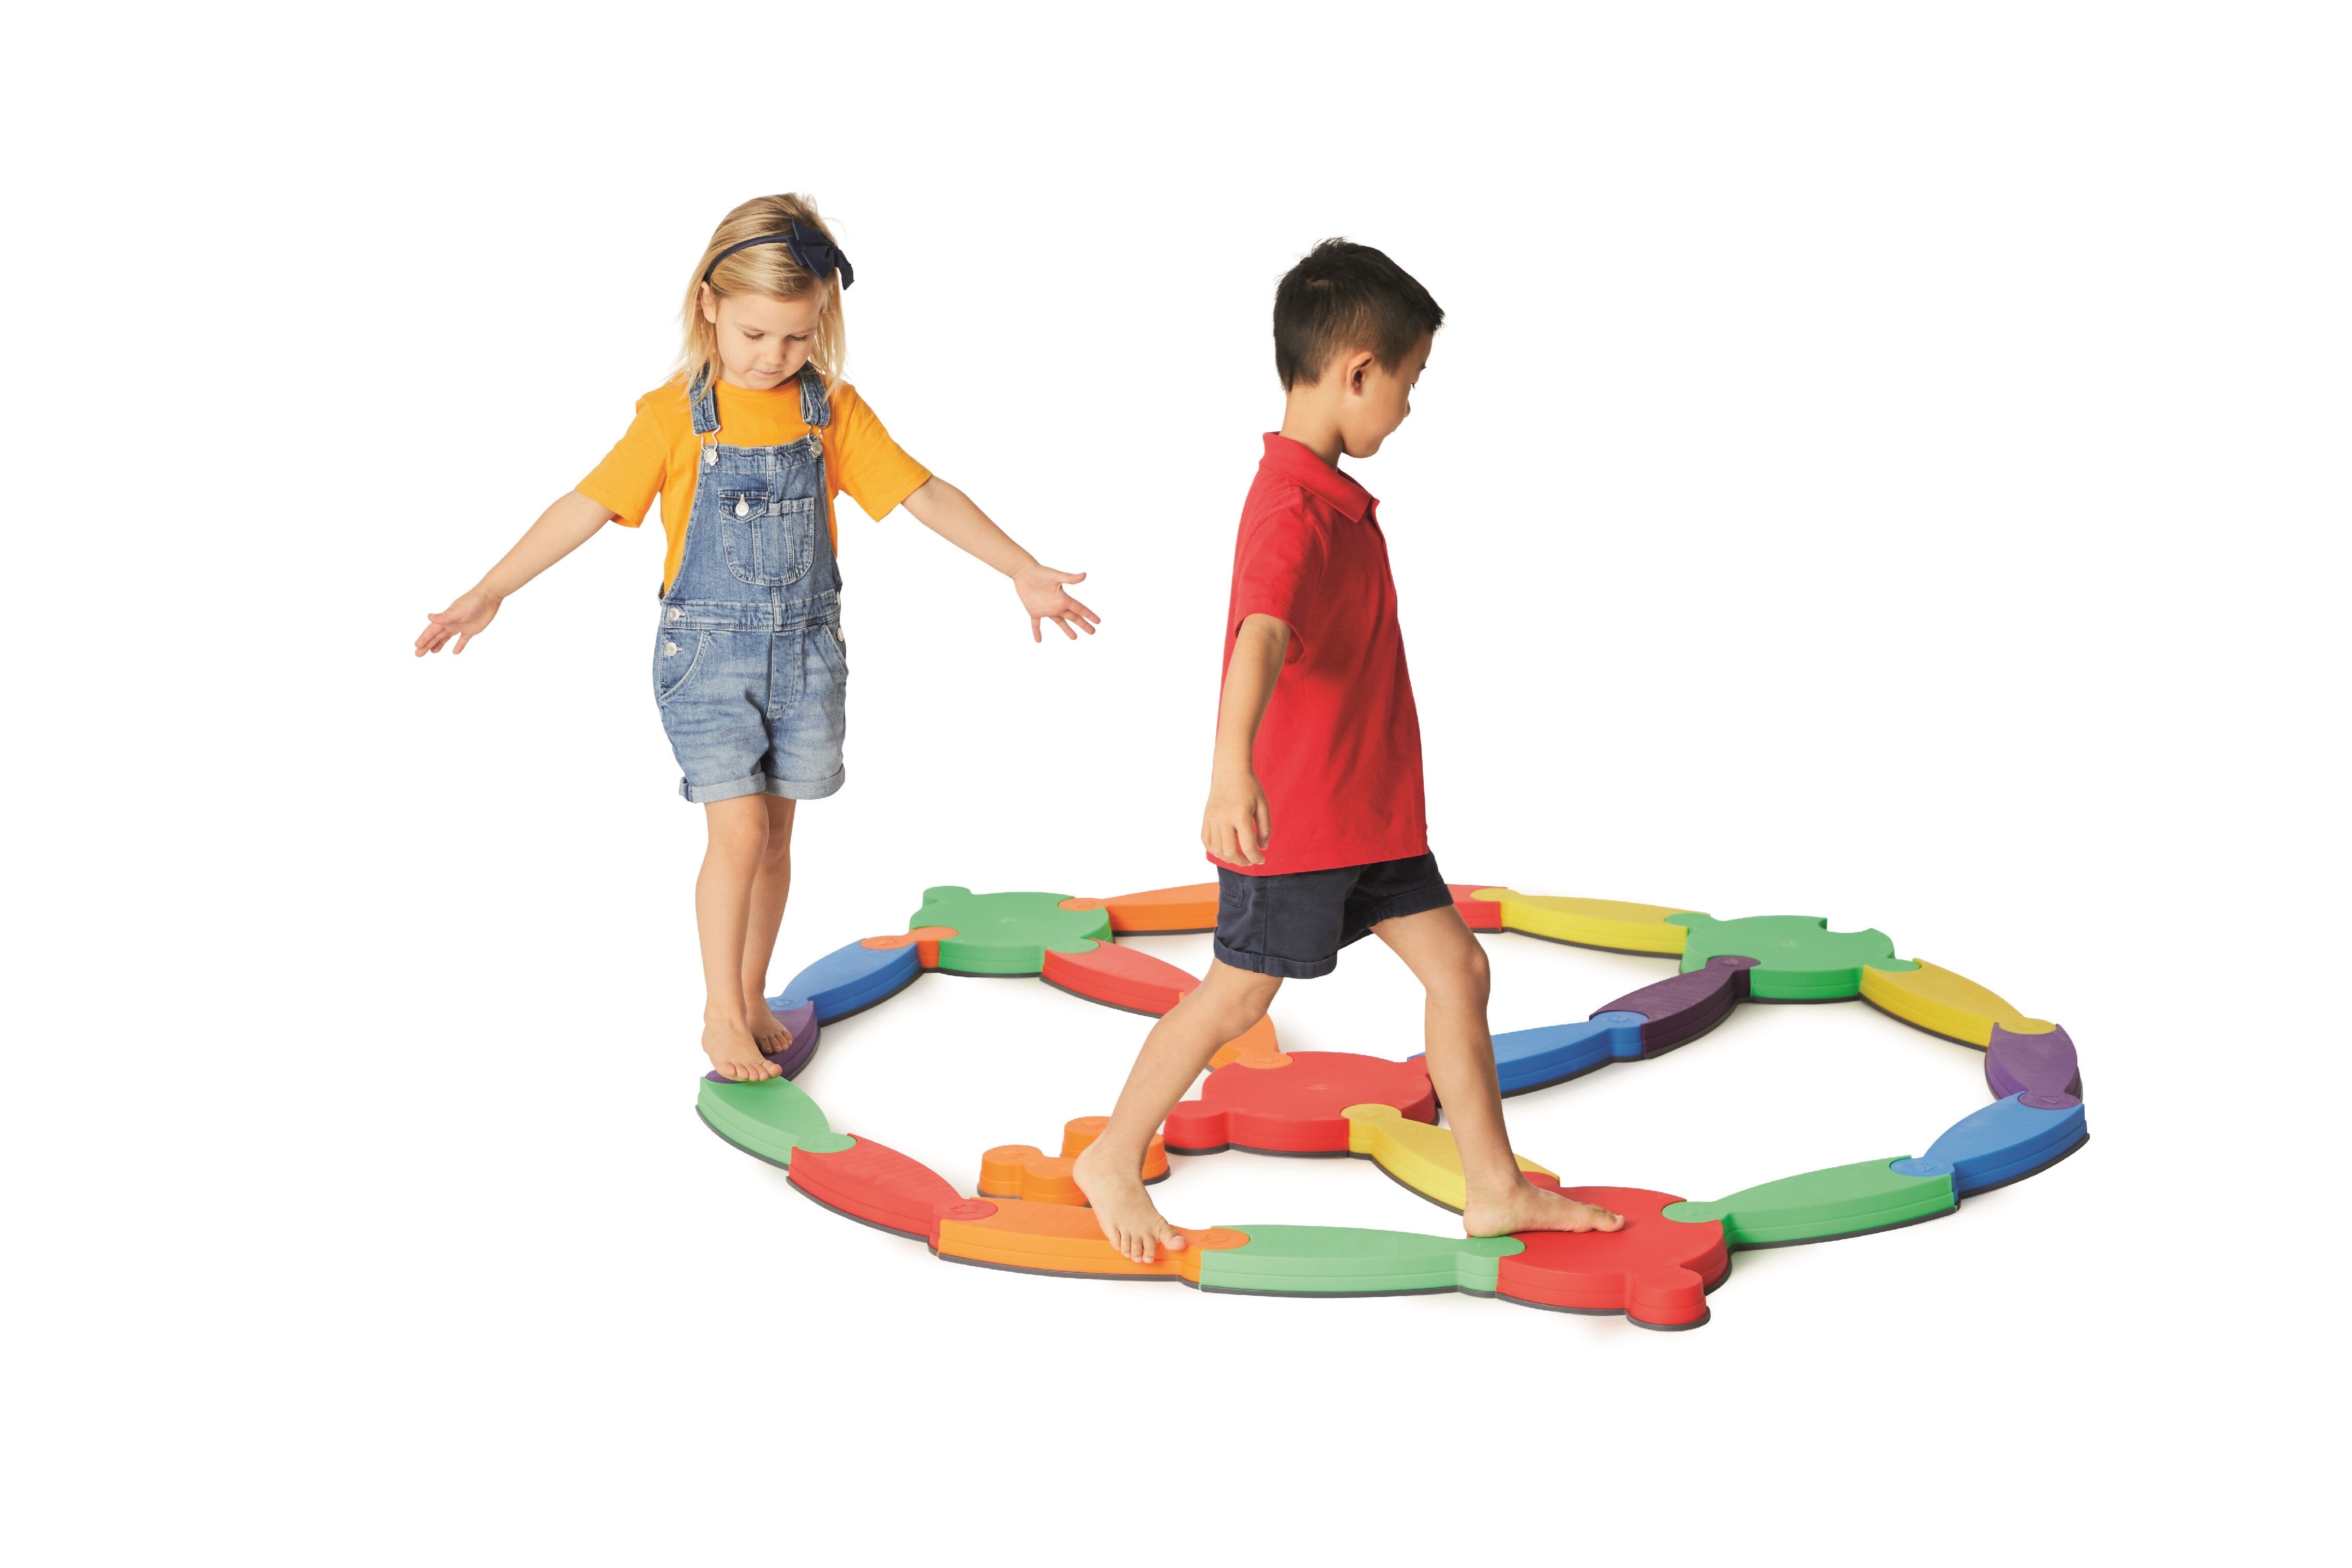 Balance Path Toys Winther for child care day care primary classrooms